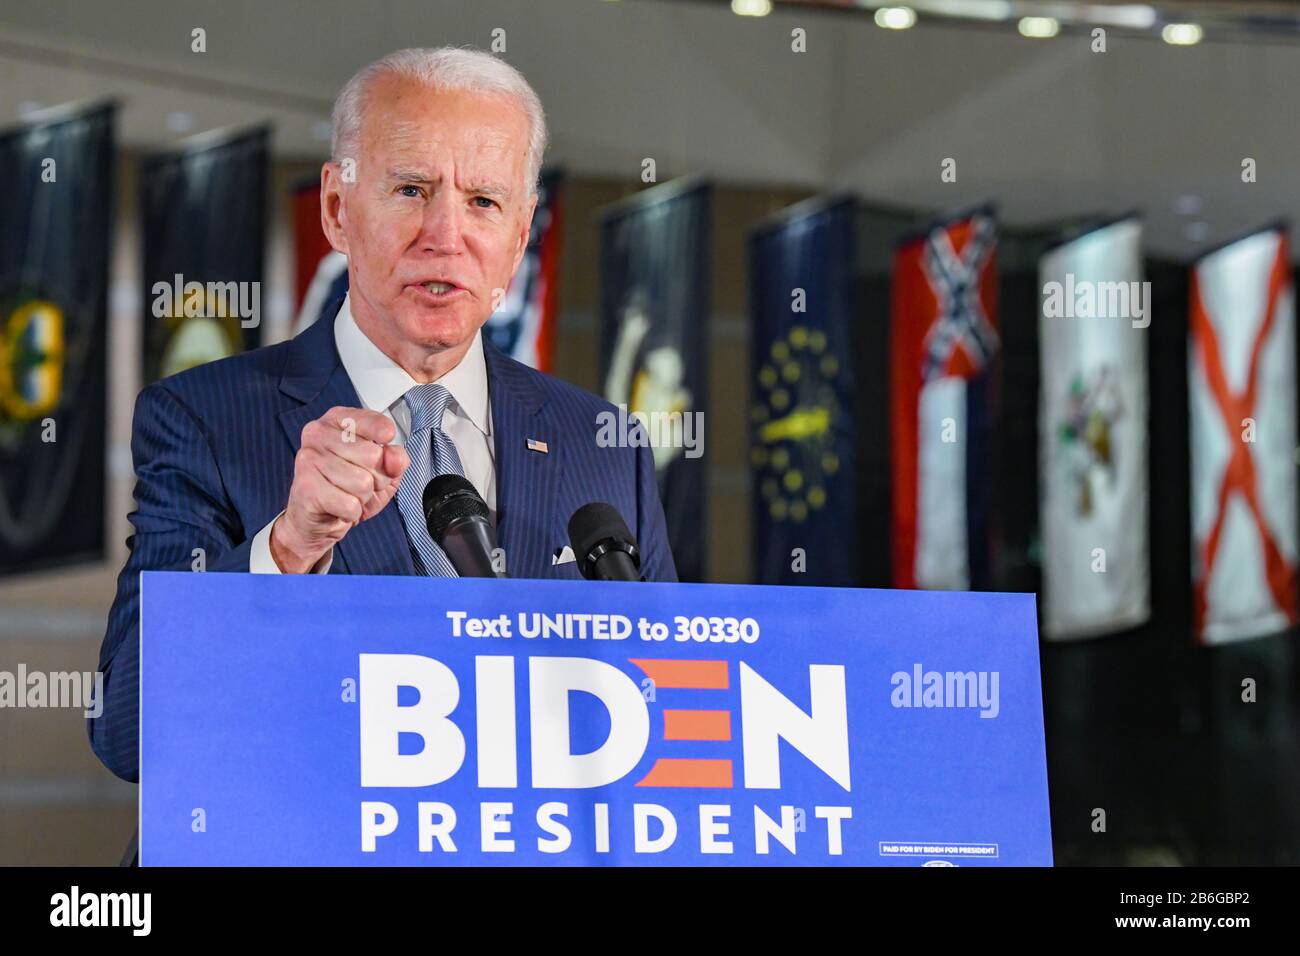 Joe Biden, United States democratic presidential candidate and former Vice President of the United States of America speaks at the National Convention Center in Philadelphia PA during primary voting Stock Photo